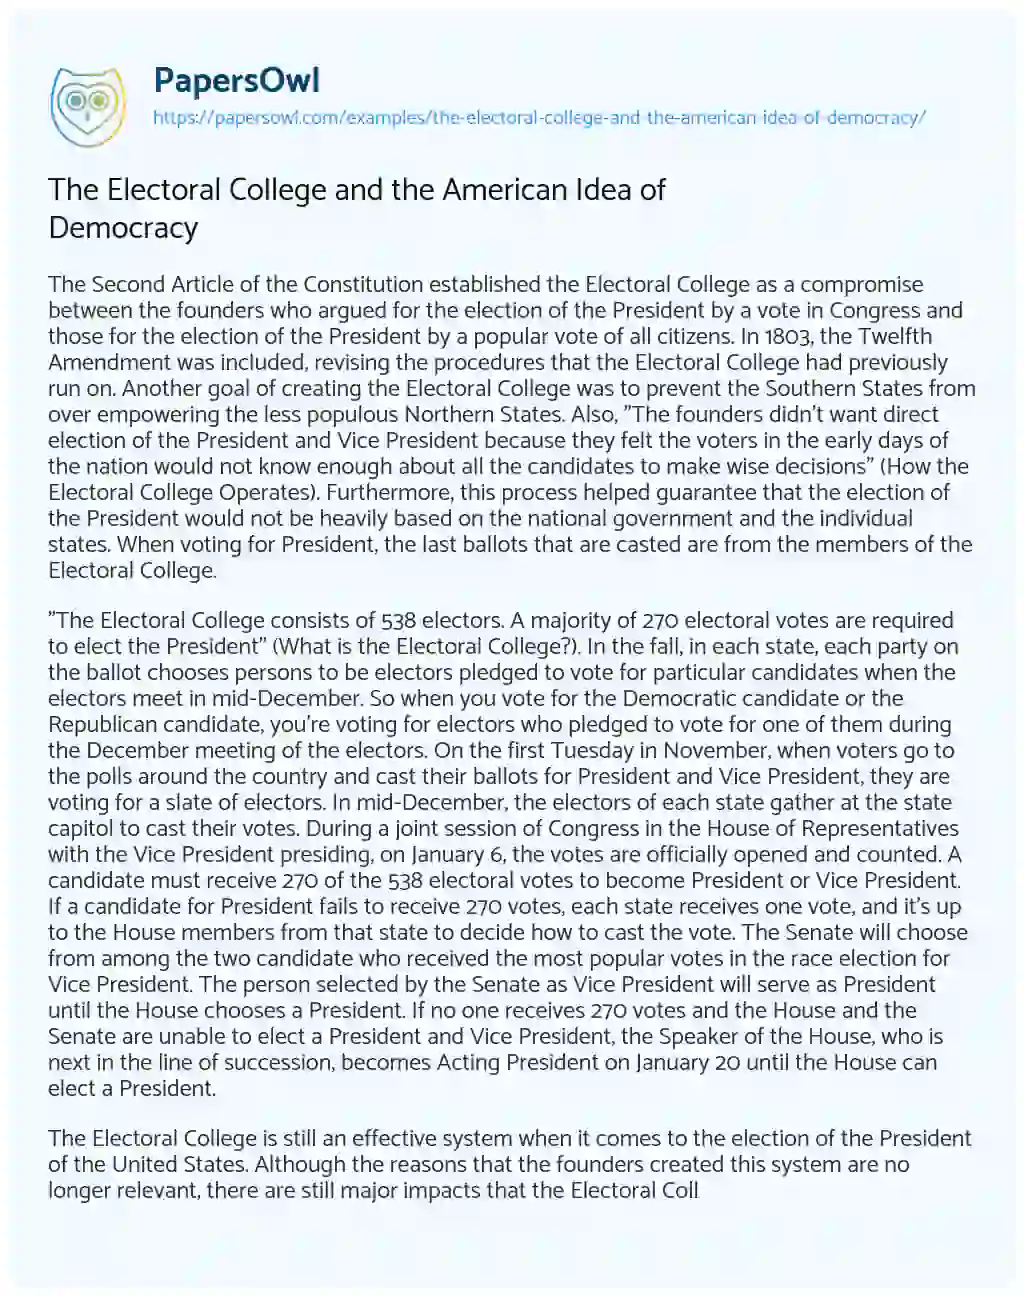 Essay on The Electoral College and the American Idea of Democracy